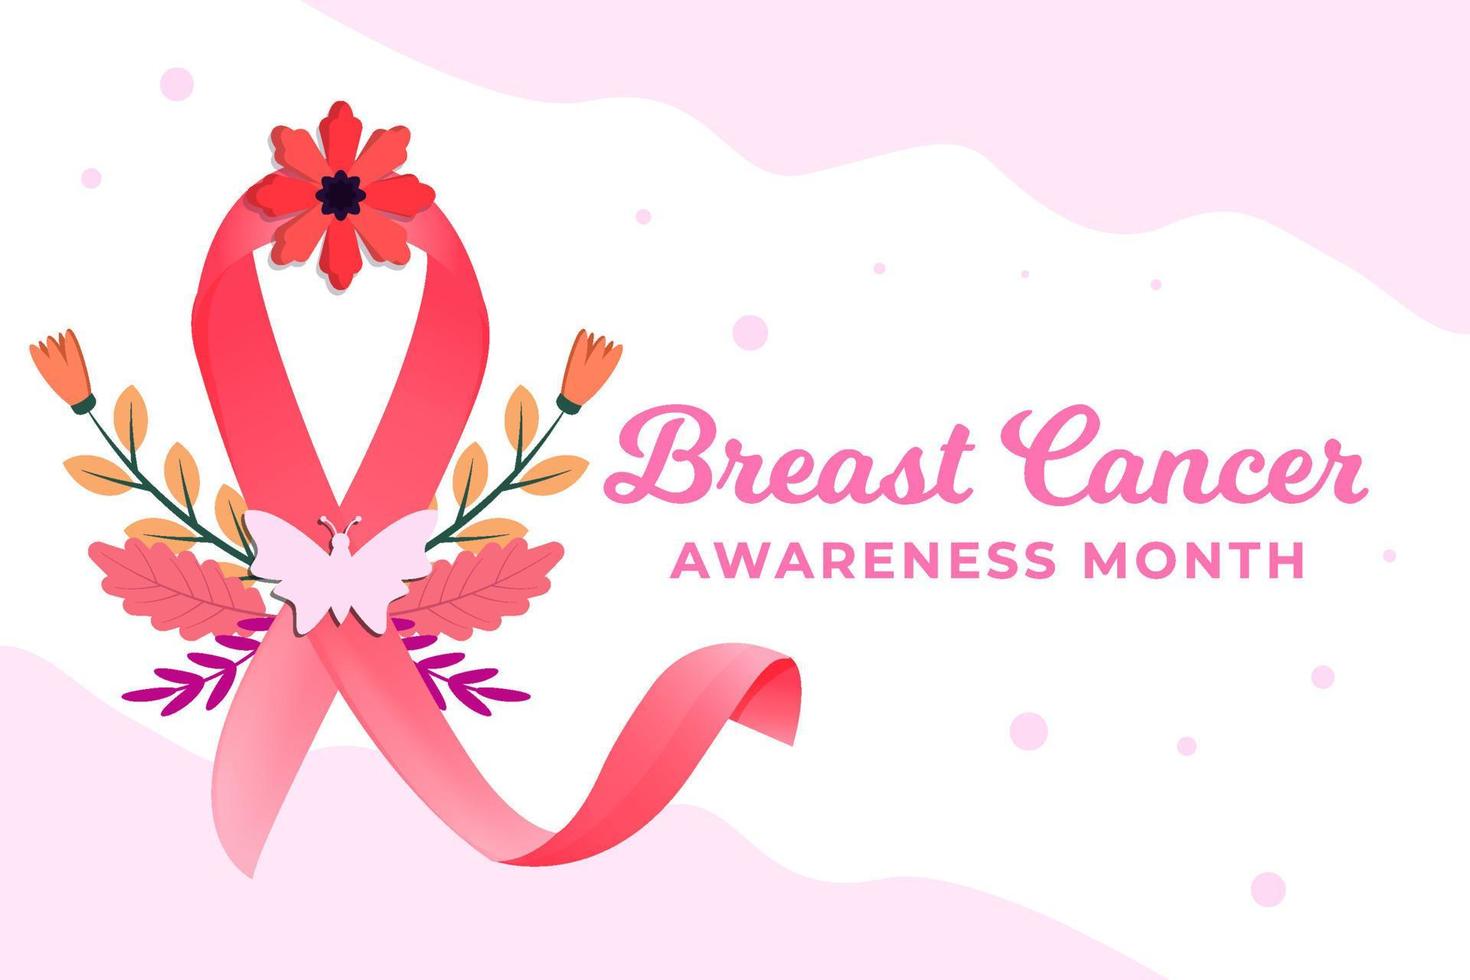 breast cancer awareness month illustration with bow ribbon and flowers vector